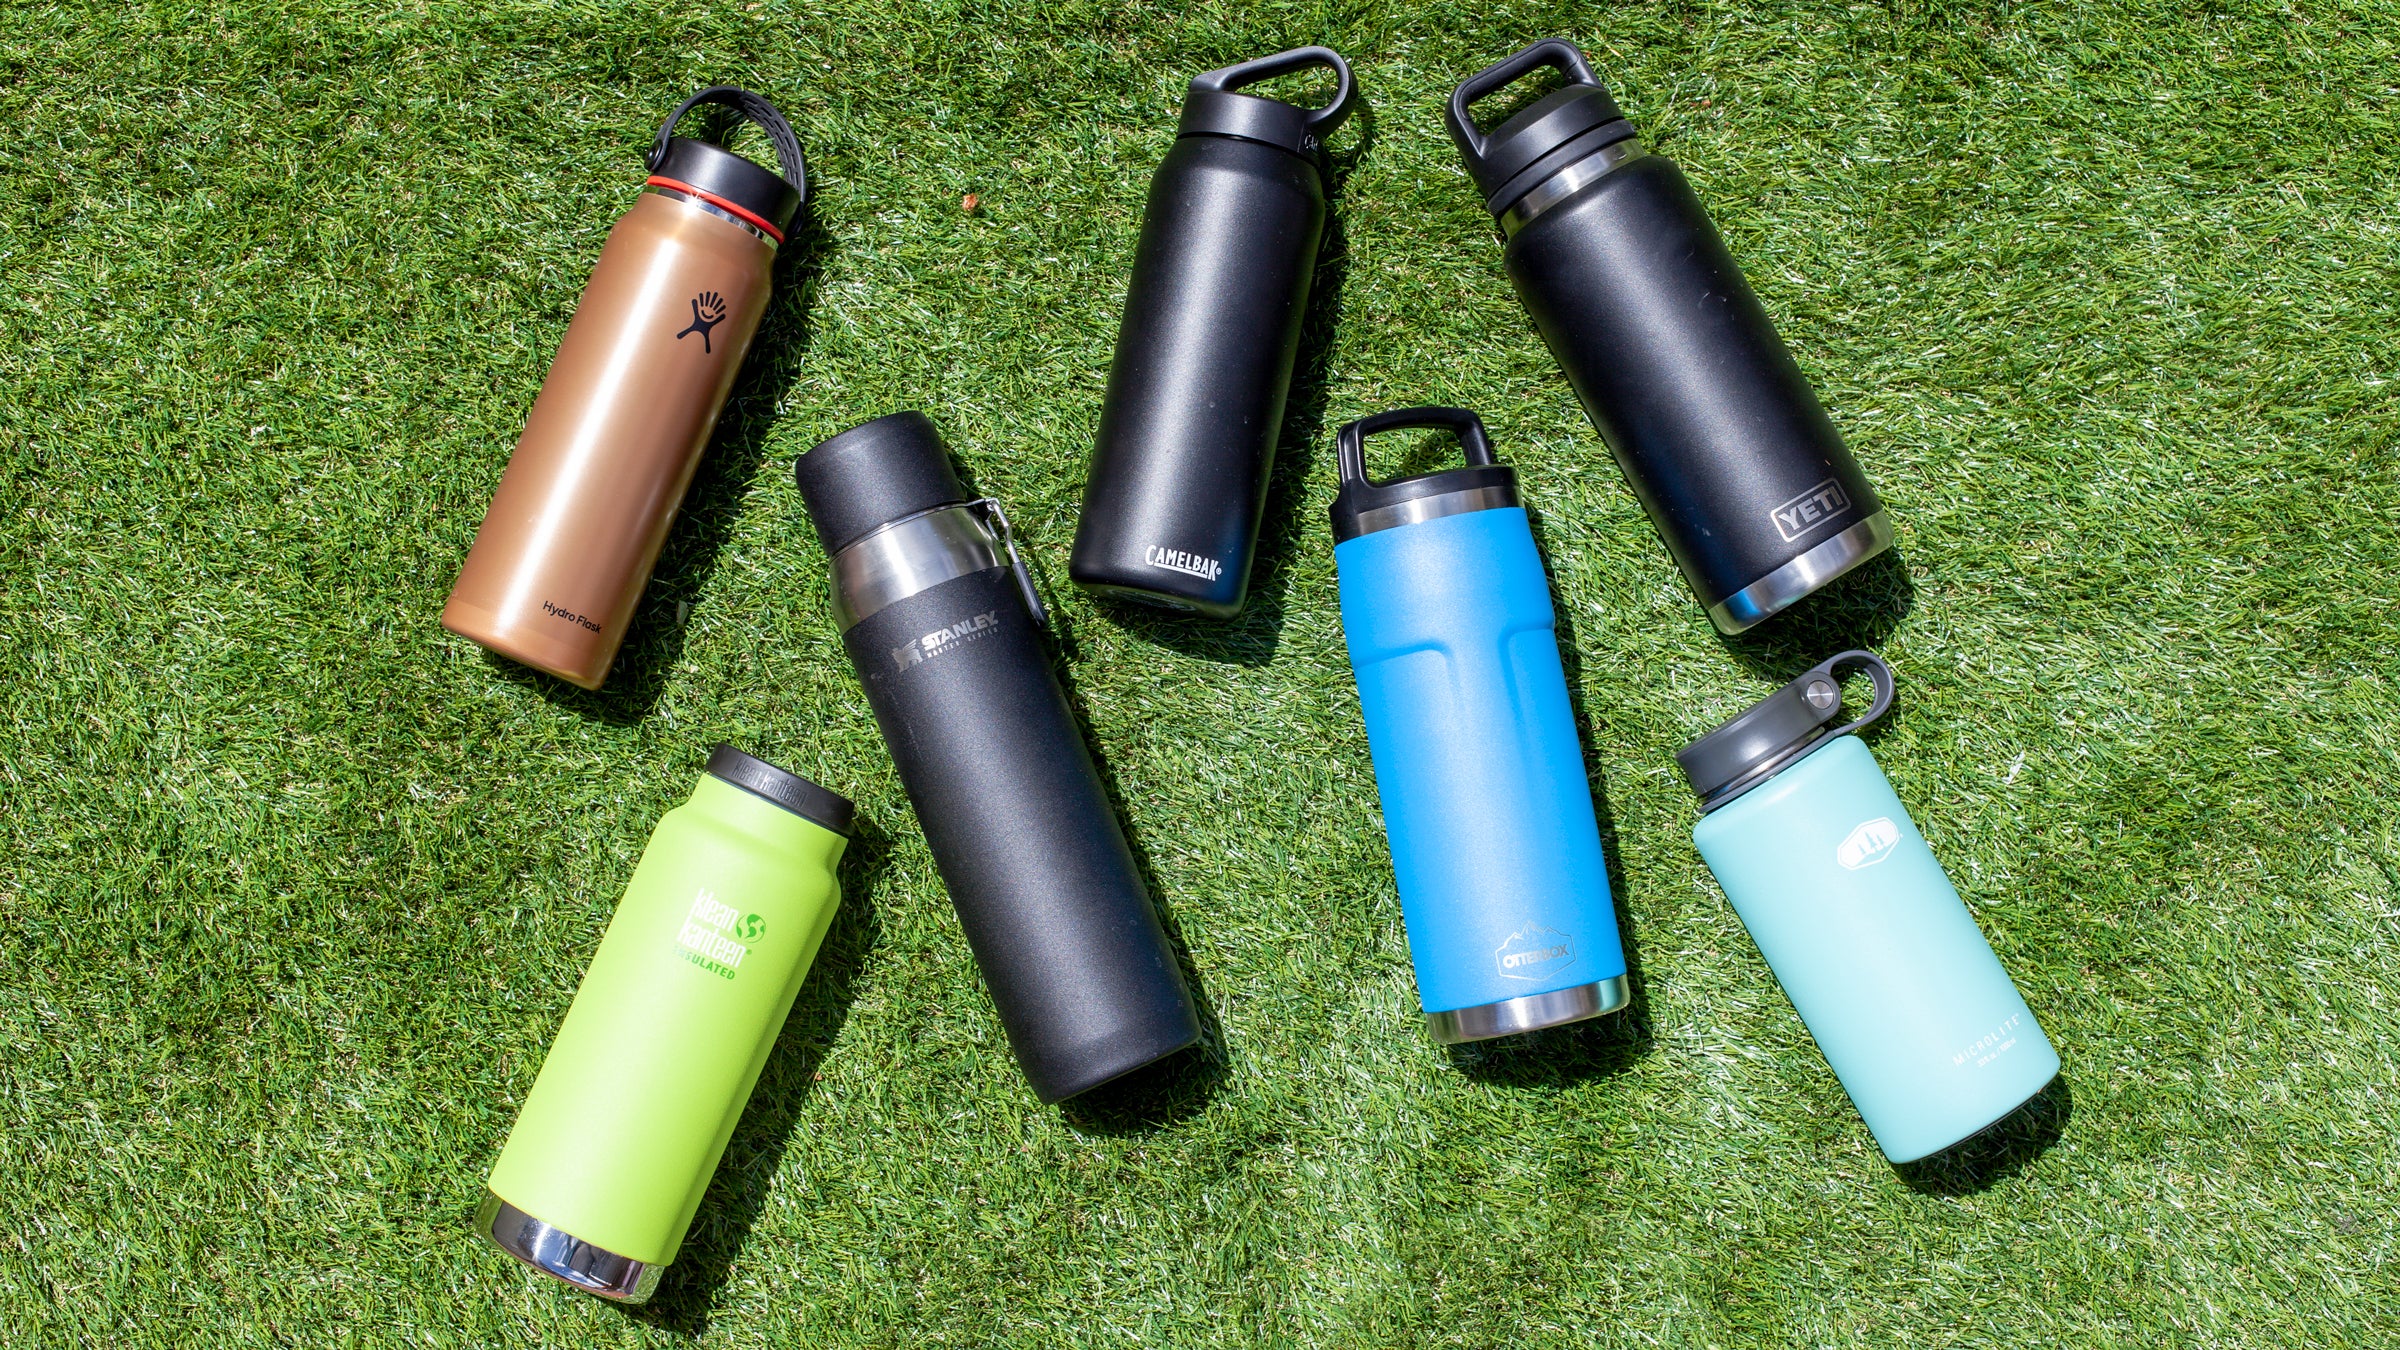 Hydro Flask Vs. Yeti: Which Brand Makes the Better Water Bottle?